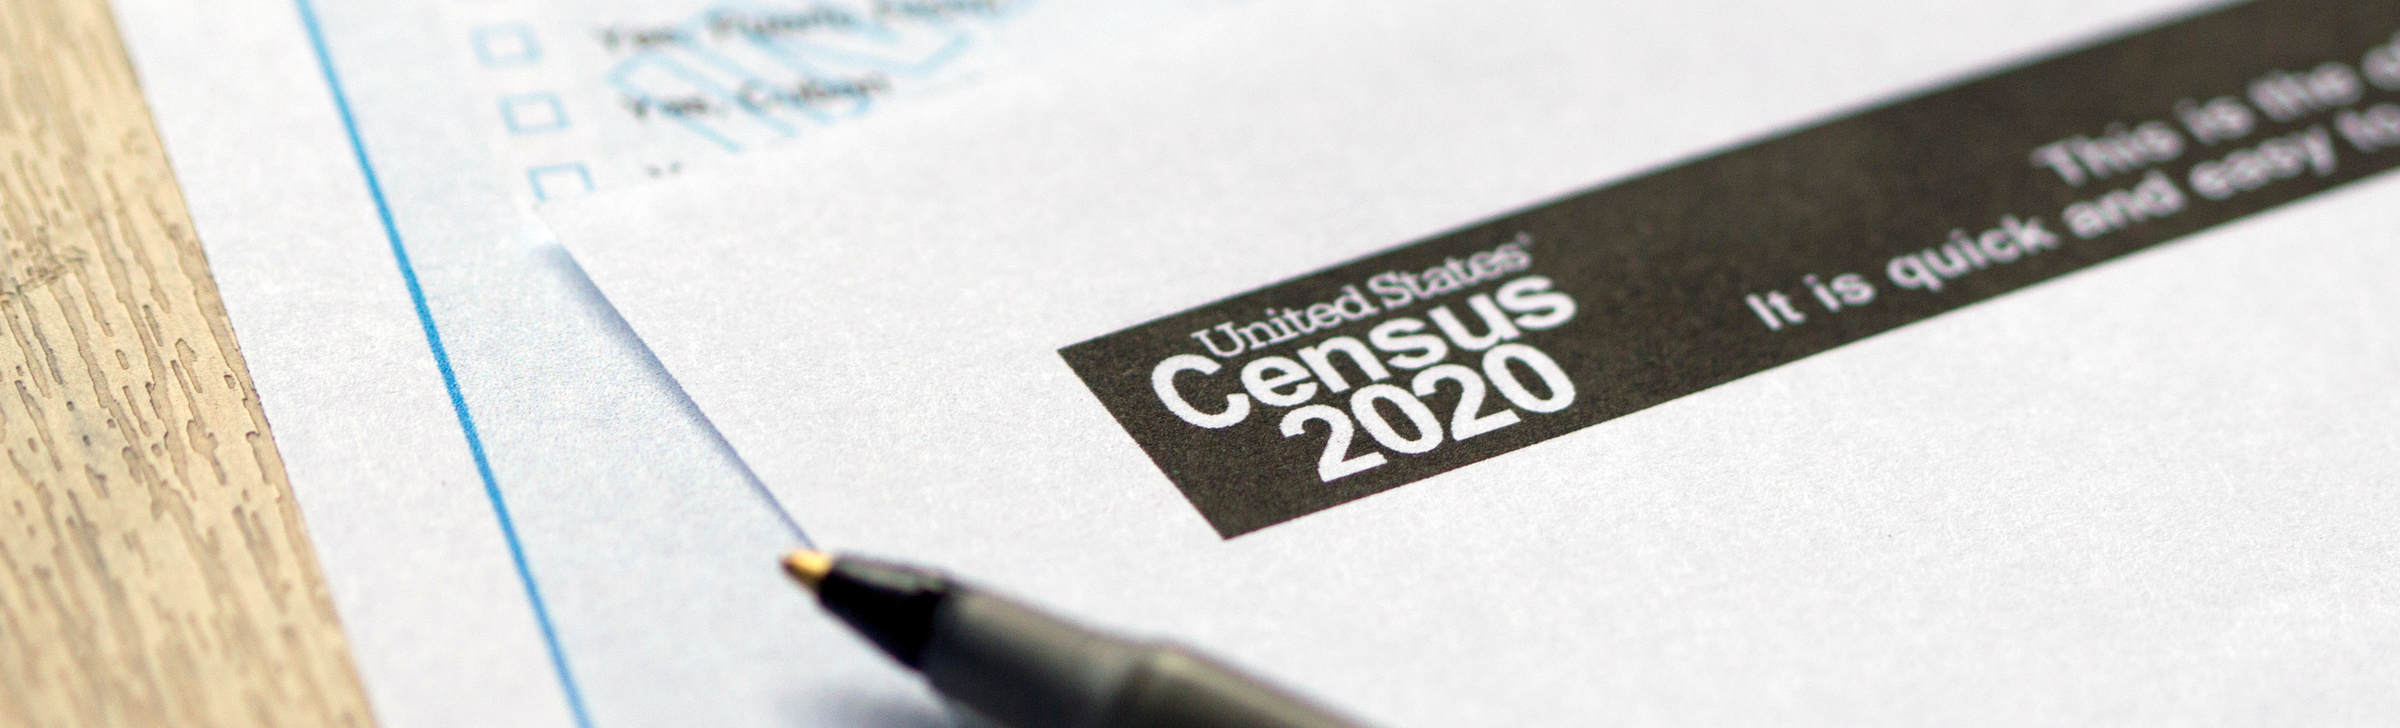 Image of the United States Census 2020 Questionnaire